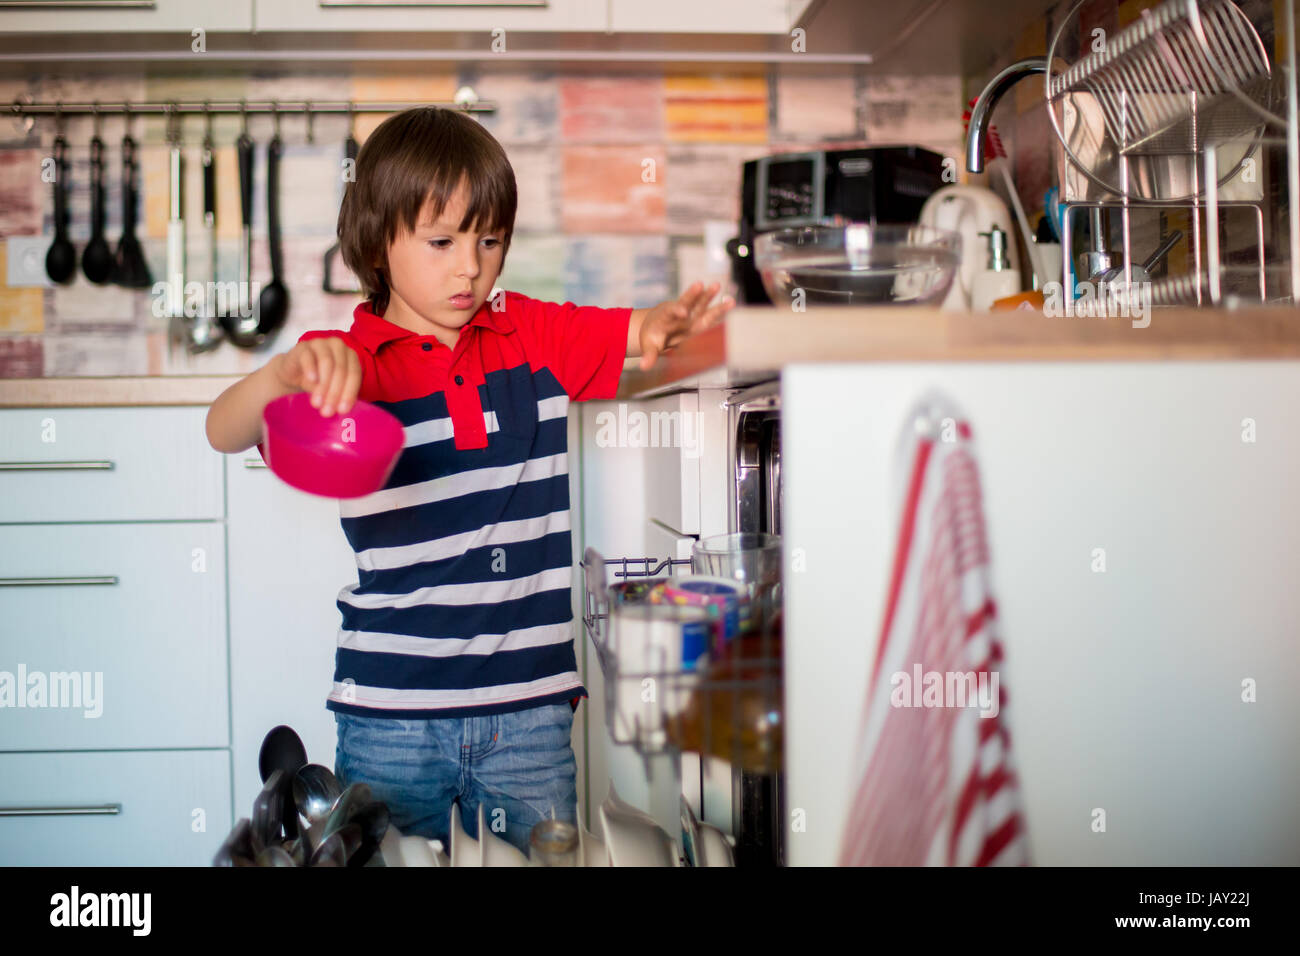 Preschool child, boy, helping mom, putting dirty dishes in dishwasher at home, modern kitchen Stock Photo